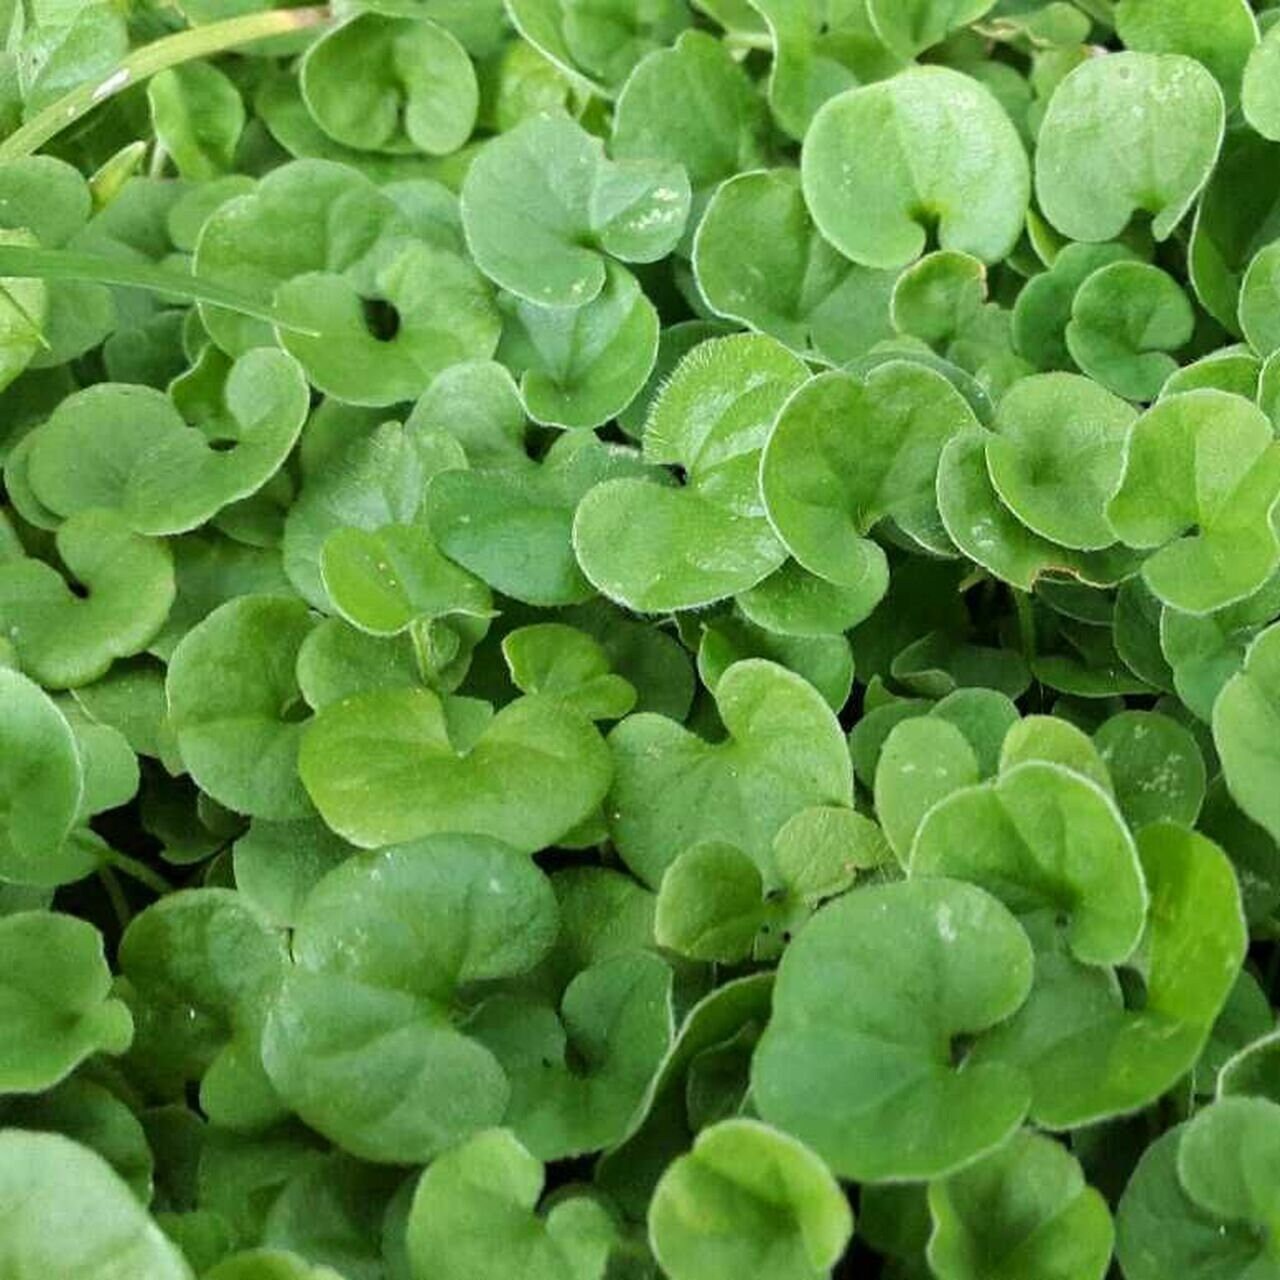 1000+ Dichondra Repens Plant Seeds-Kidney Weed- (10g) Dichondra Pony Foot-Lawn Leaf-B259